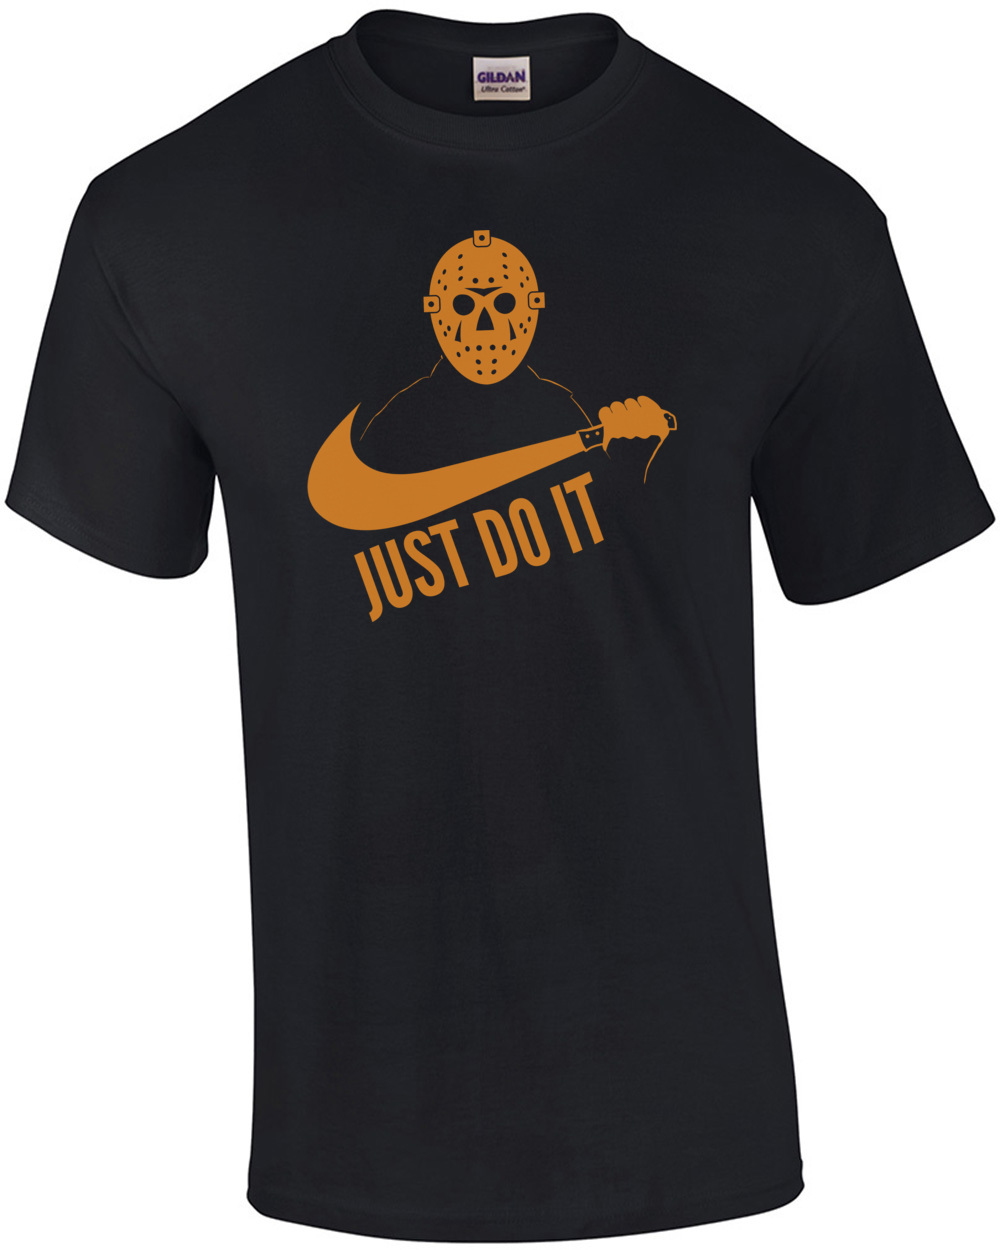 Just Do It Jason Voorhees Friday The 